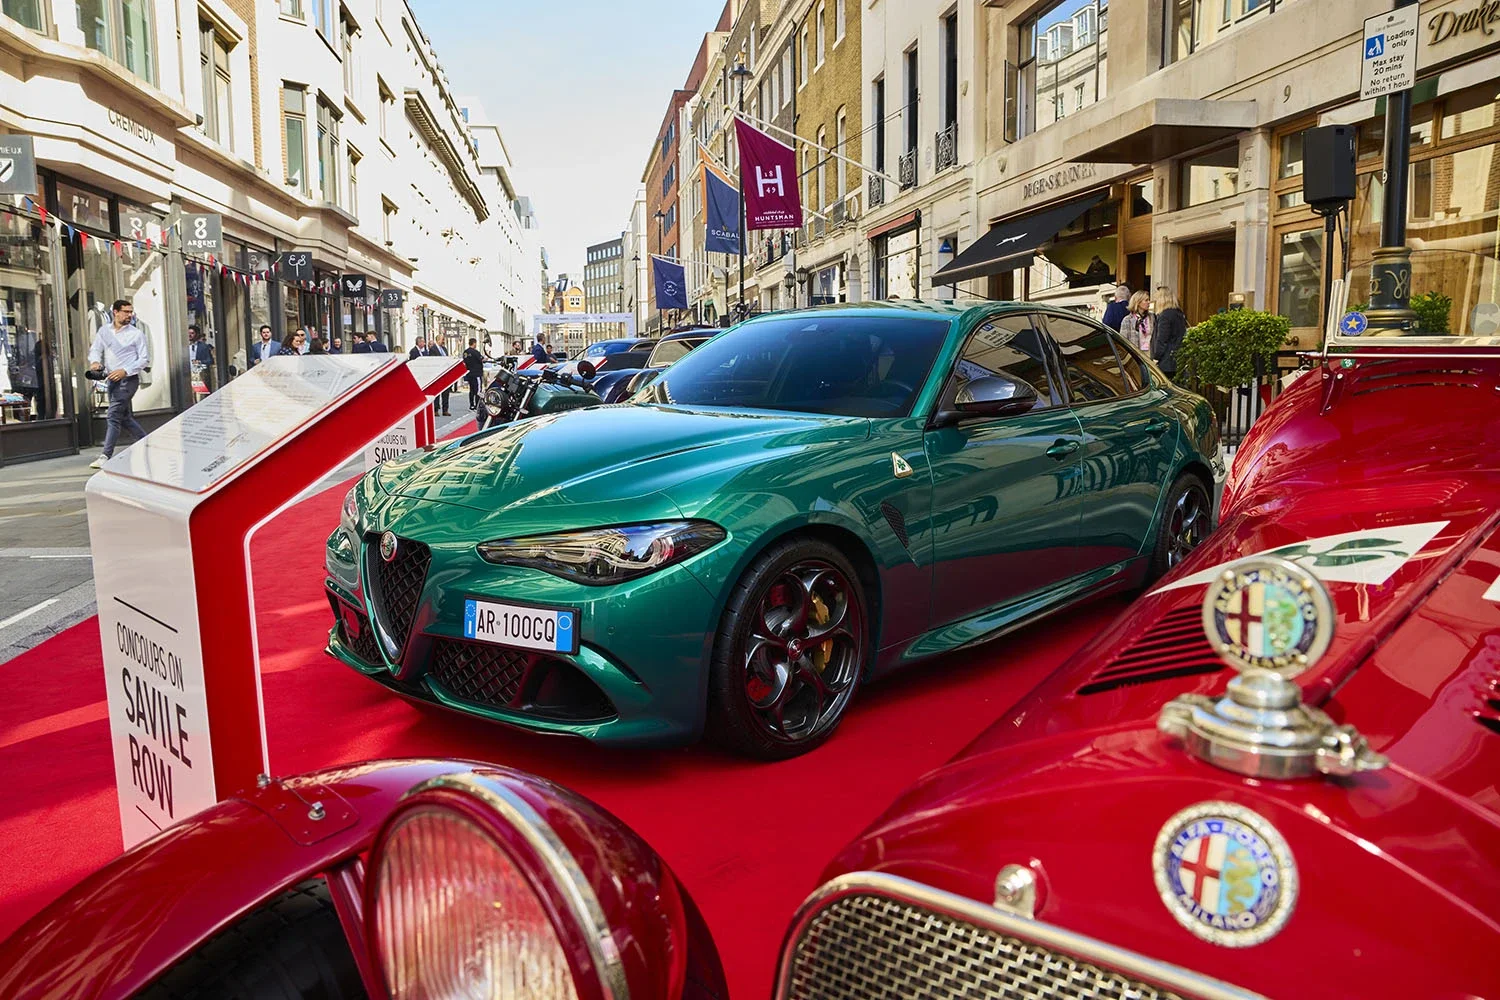 Revving up in style: Concours on London’s Savile Row returns for 2023